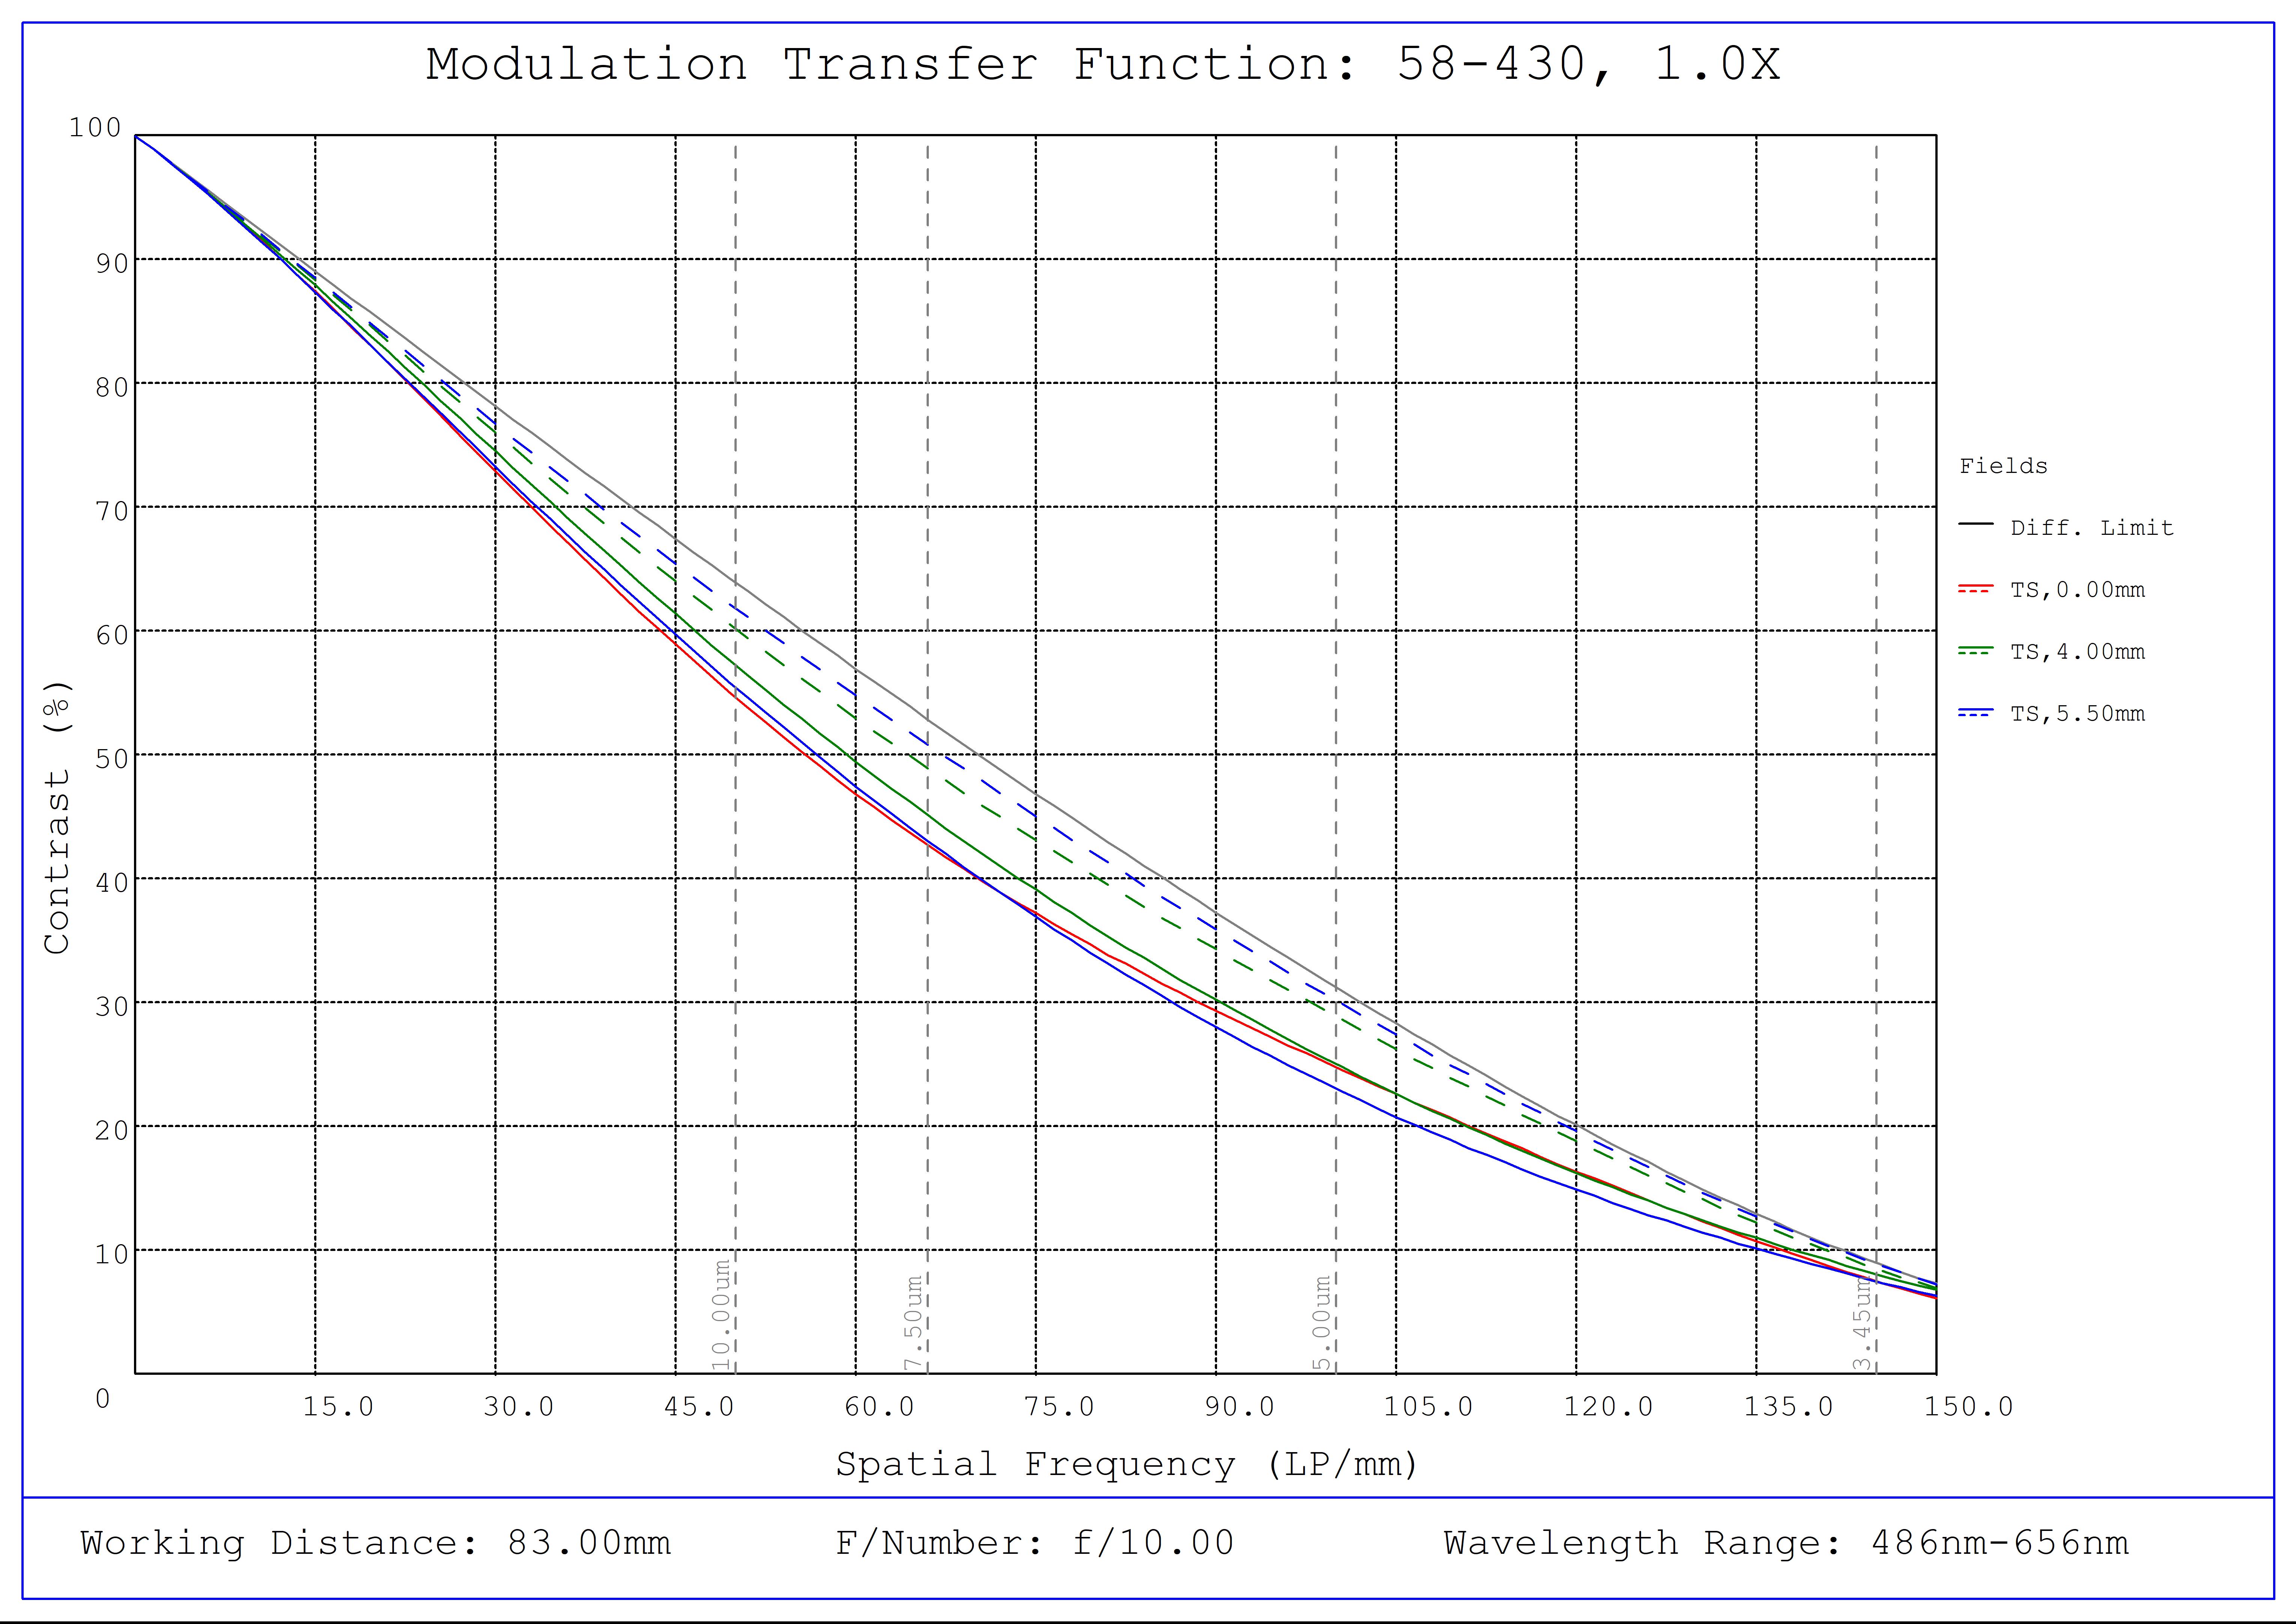 #58-430, 1.0X SilverTL™ Telecentric Lens, Modulated Transfer Function (MTF) Plot, 83mm Working Distance, f10